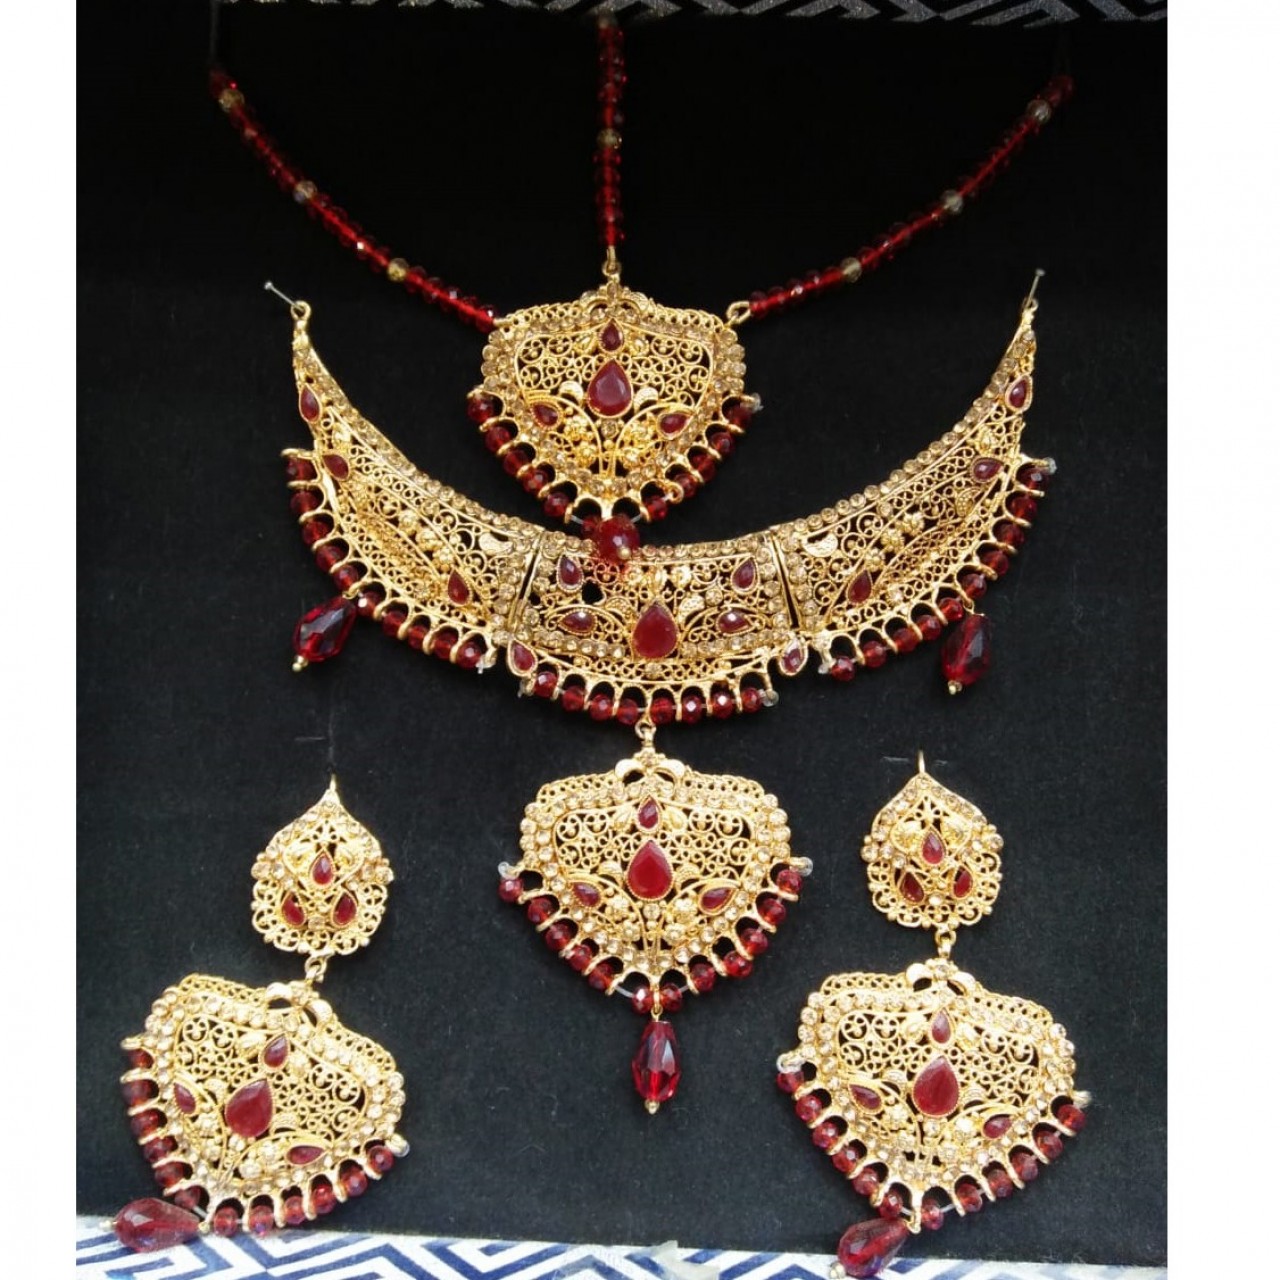 Neckless, Earrings & Matha Patti Jewelry Set For Women - Casting Material